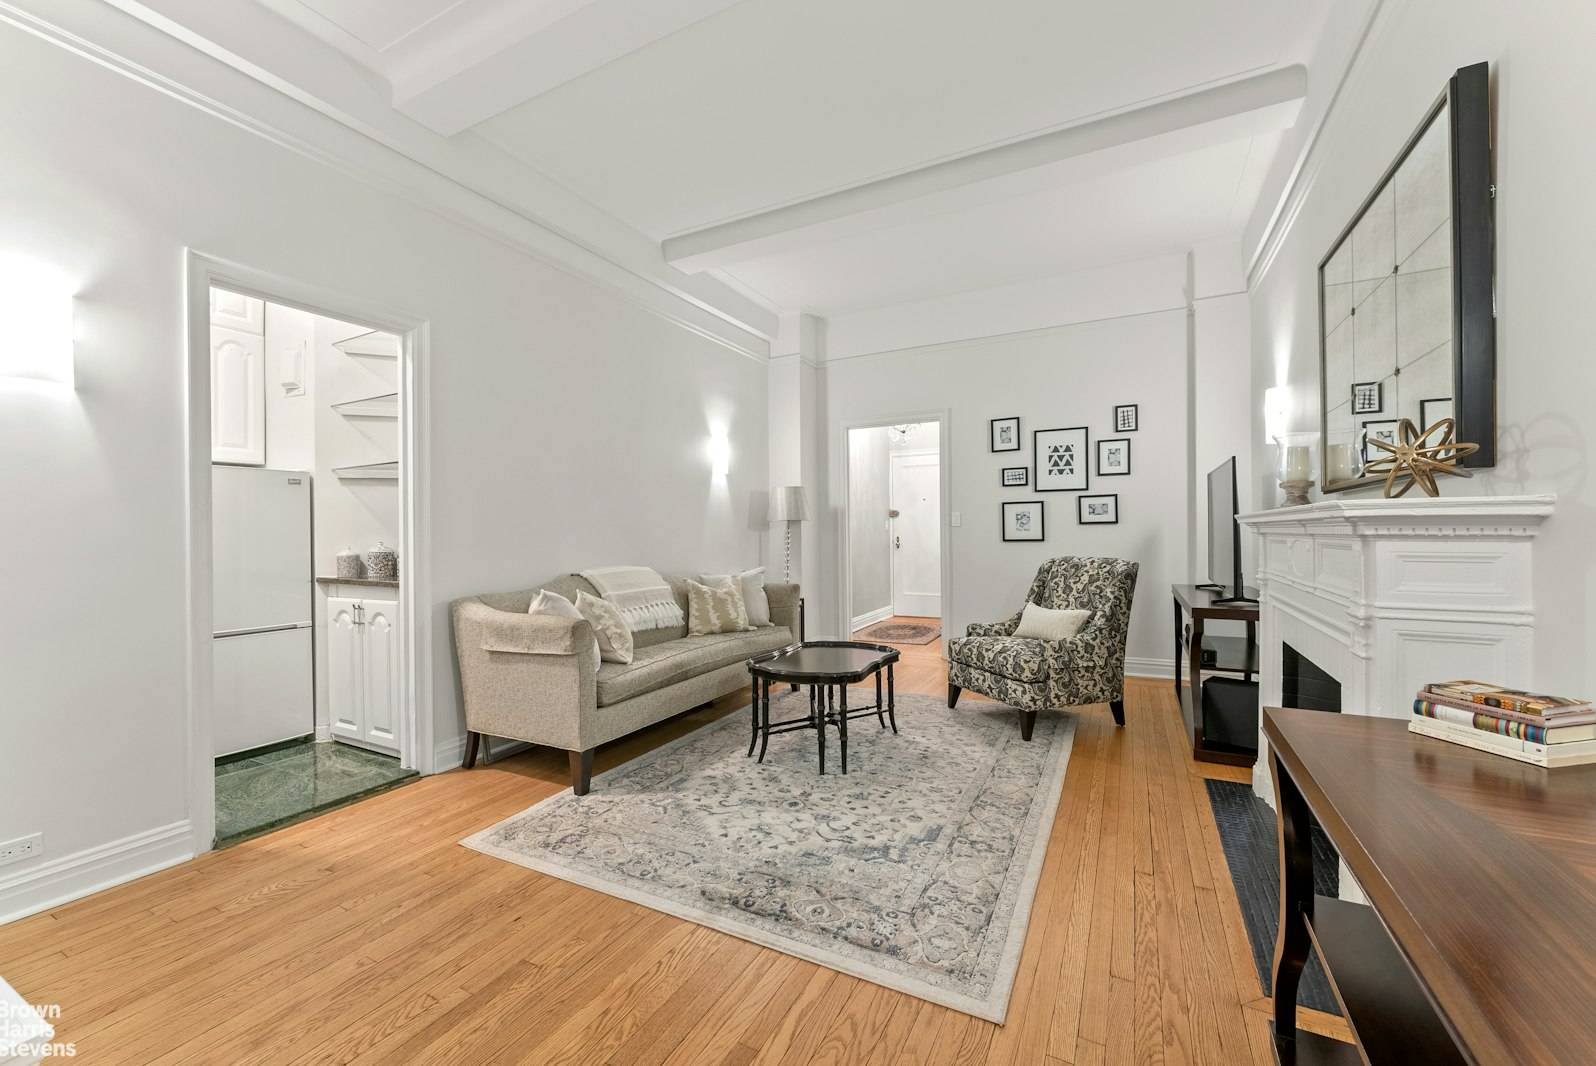 Previously owned by Actor Bryan Batt, best known for his role in the AMC series Mad Men as Salvatore Romano, this one bedroom home is the perfect pied a terre ...